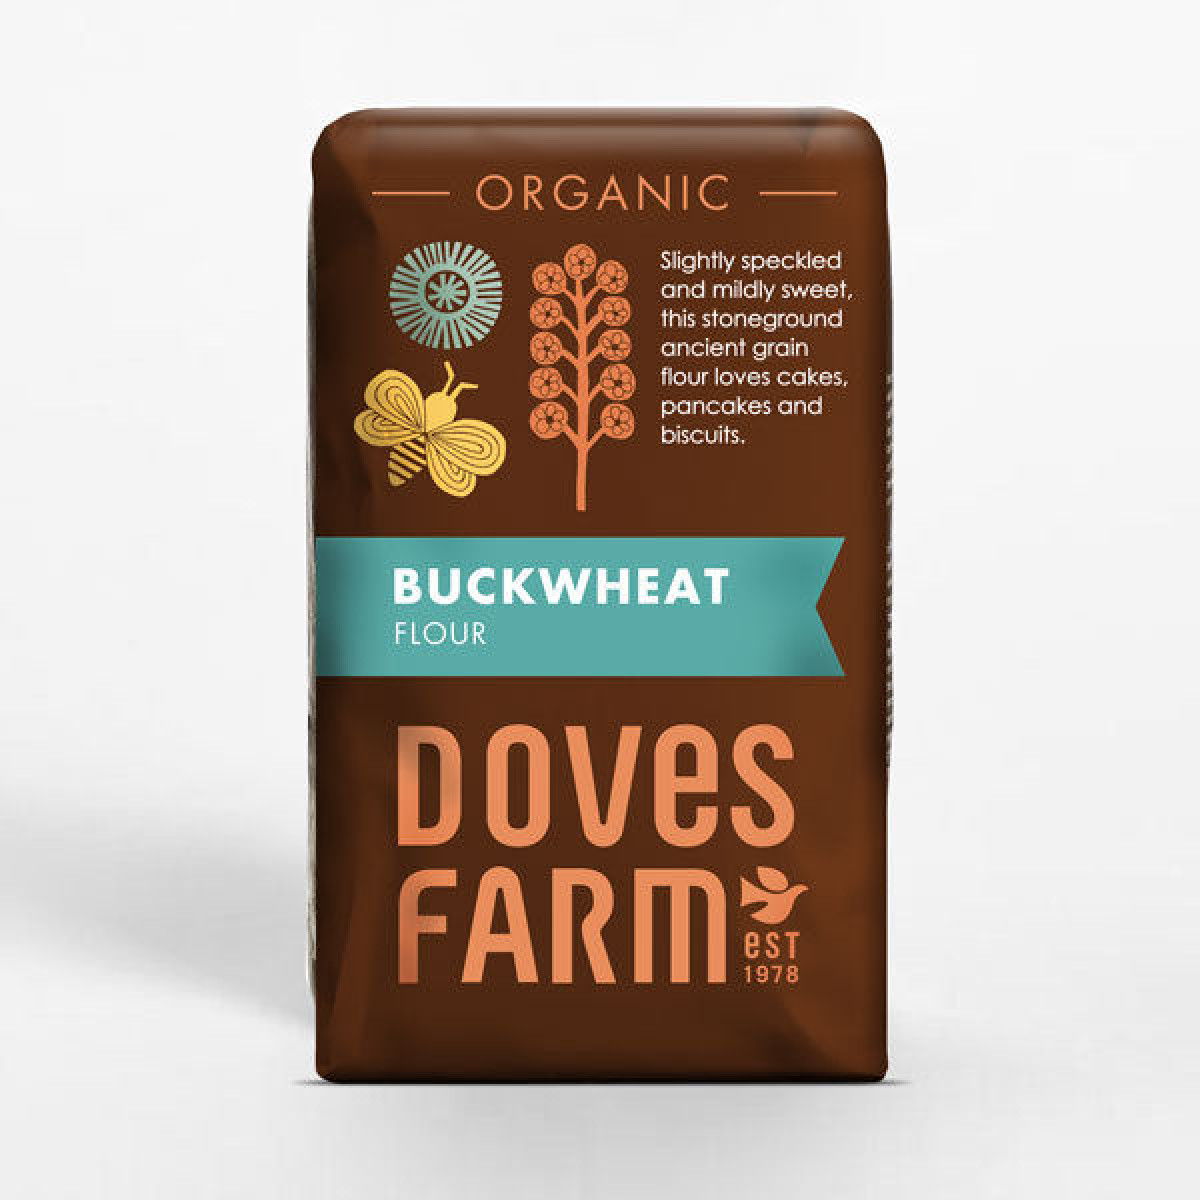 Product picture for Buckwheat Flour